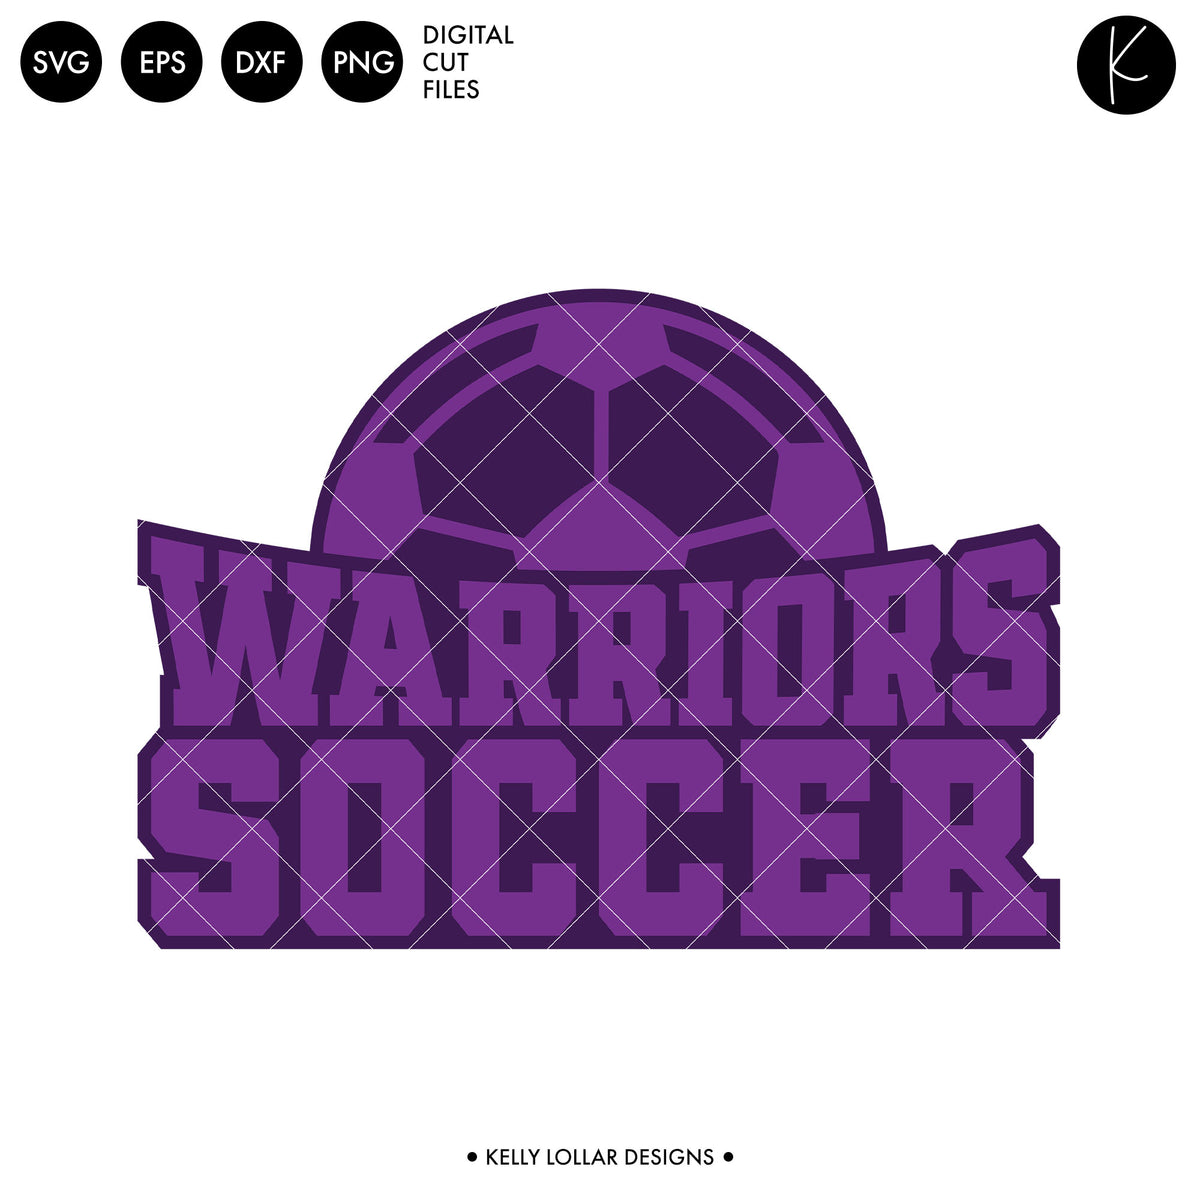 Warriors Soccer and Football Bundle | SVG DXF EPS PNG Cut Files